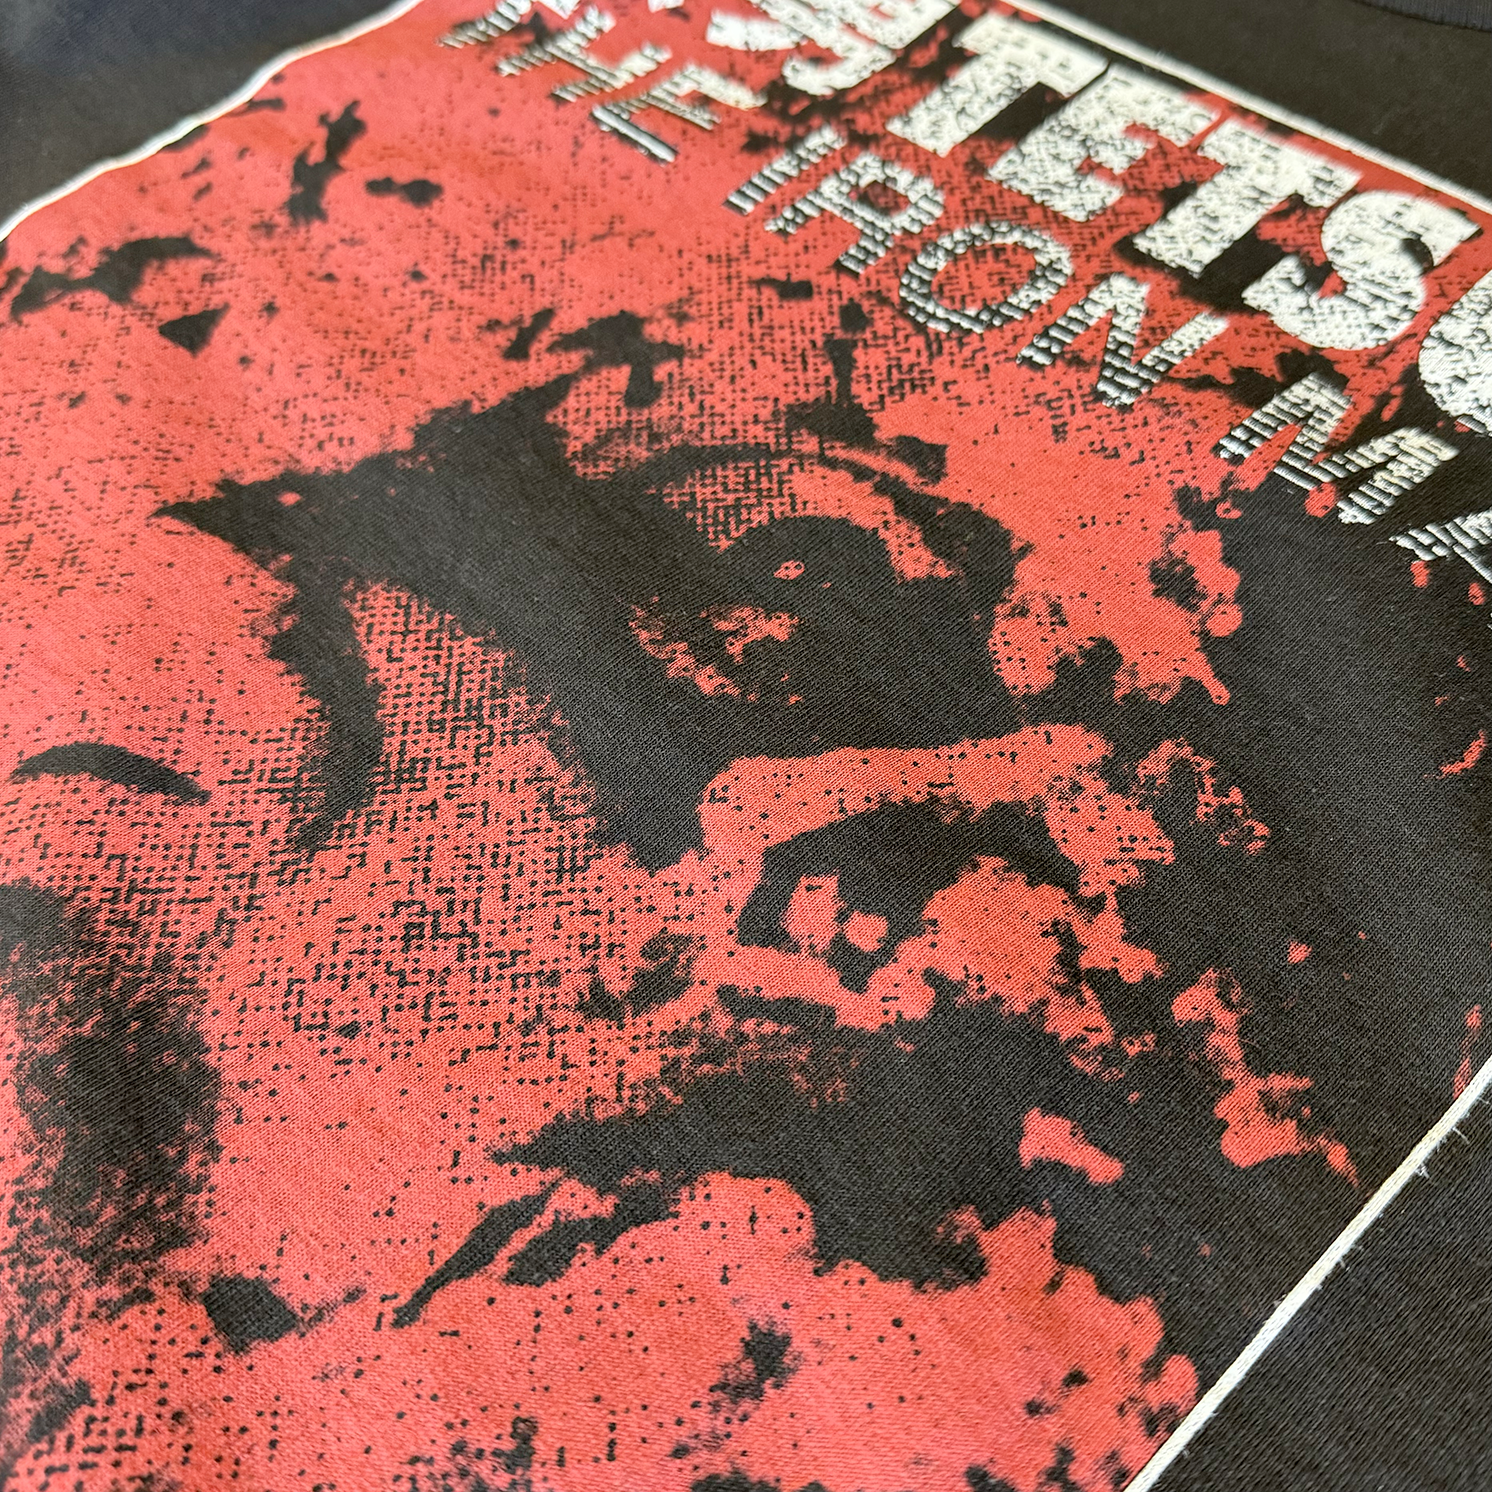 Zoomed in detail of the black version of the shirt. It has a distorted image of the main character printed in red, and reads "Tetsuo The Iron Man" in white with a white border.